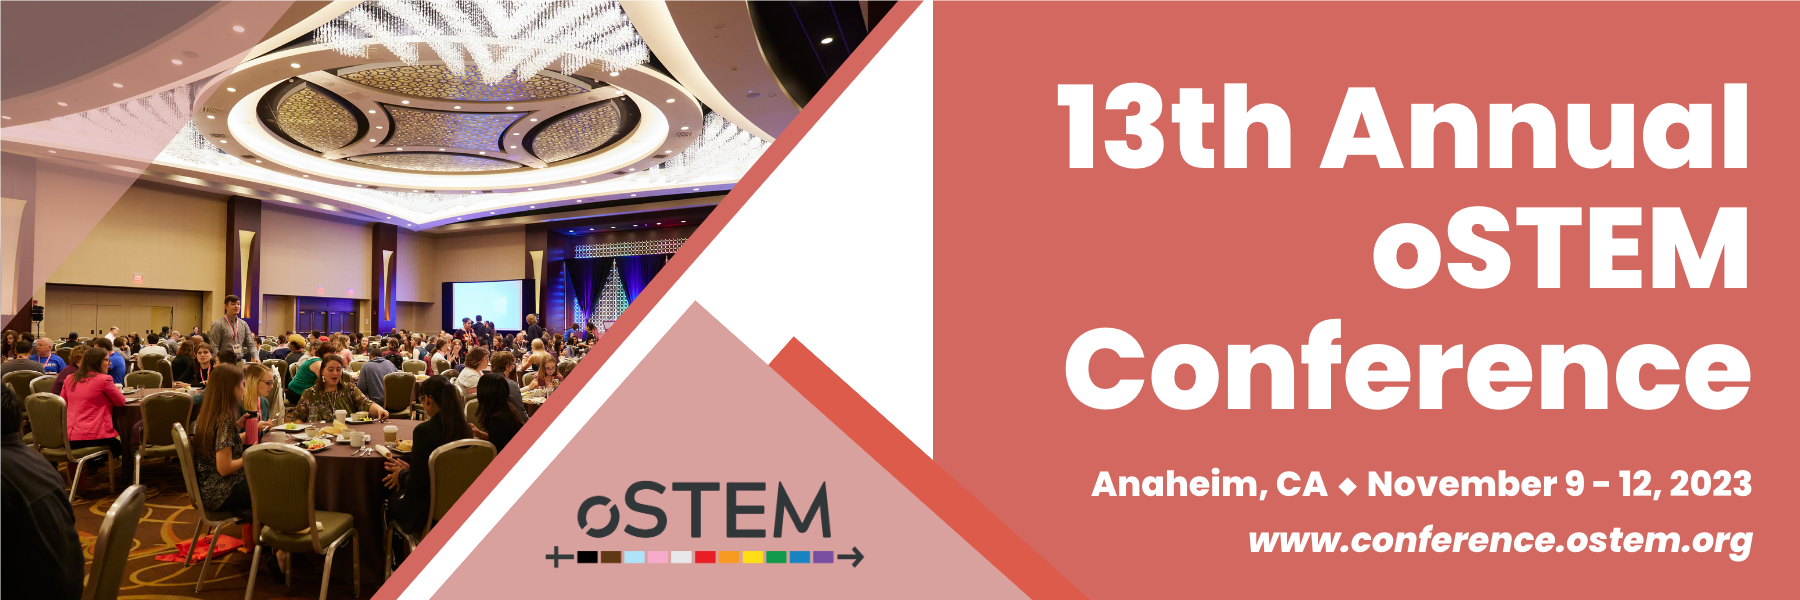 13th Annual oSTEM Conference 2023 from November 9 – 12, 2023 in Anaheim, CA. website www.conference.ostem.org